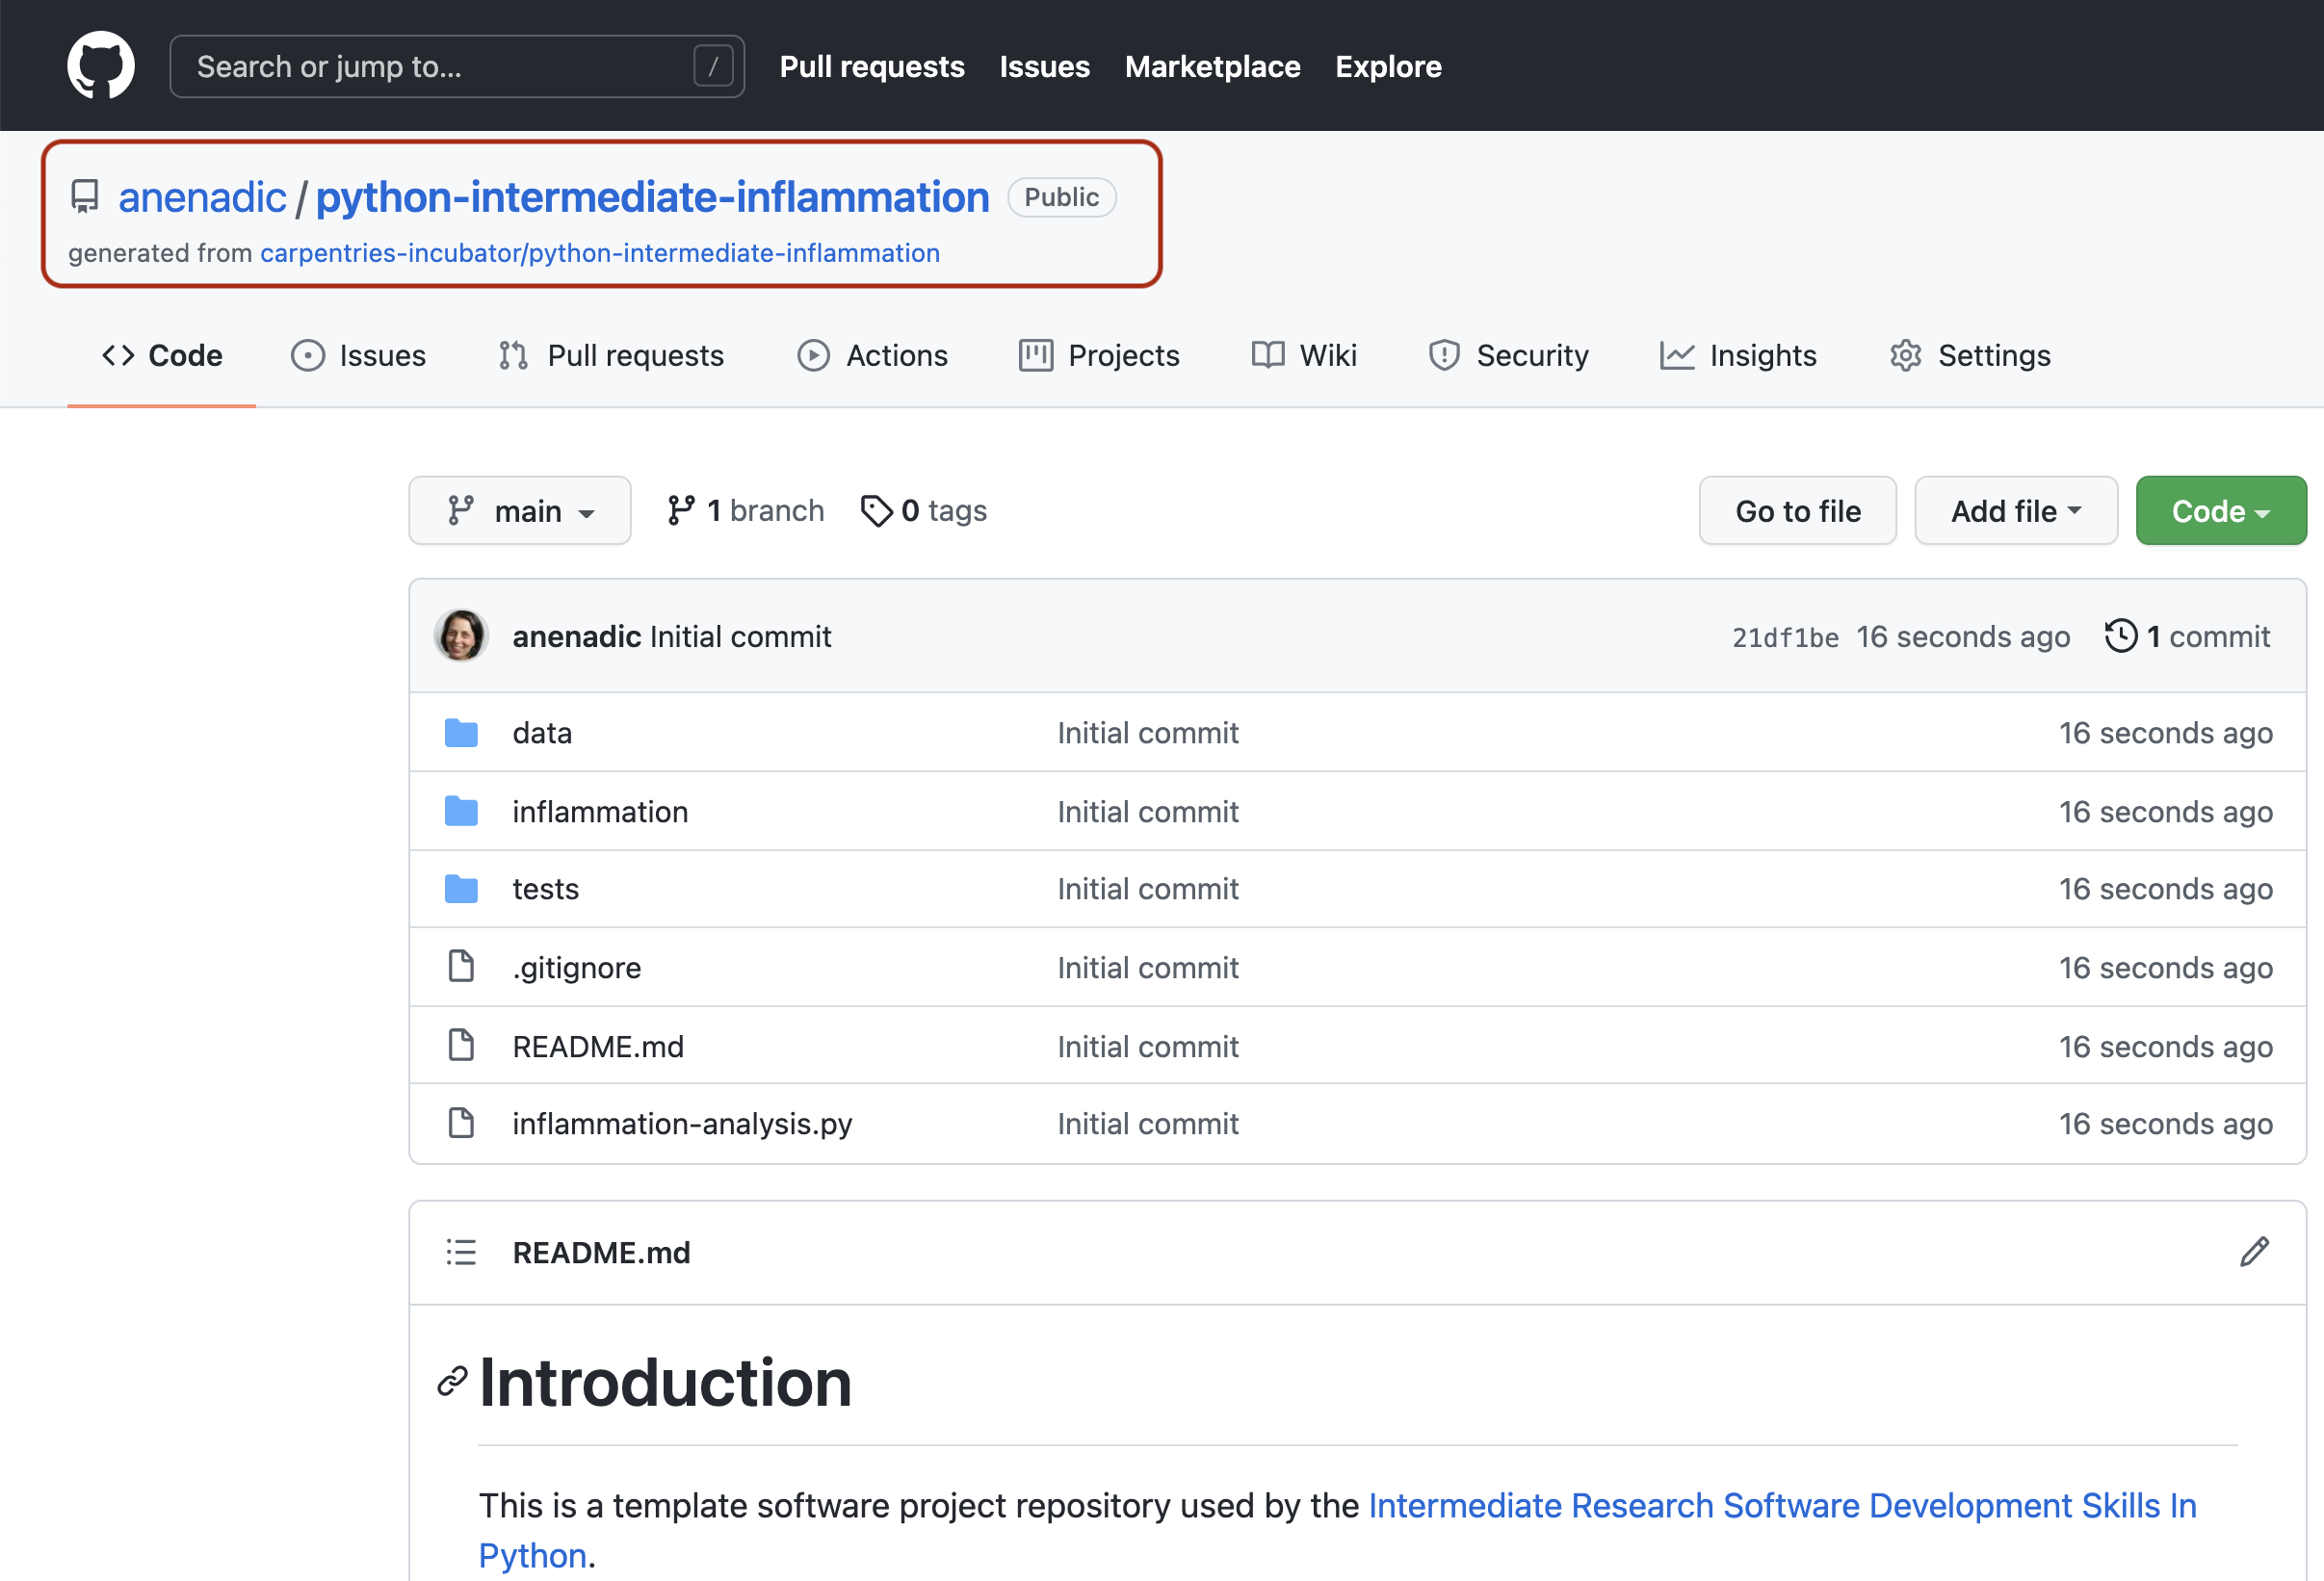 View of the own copy of the software template repository in GitHub